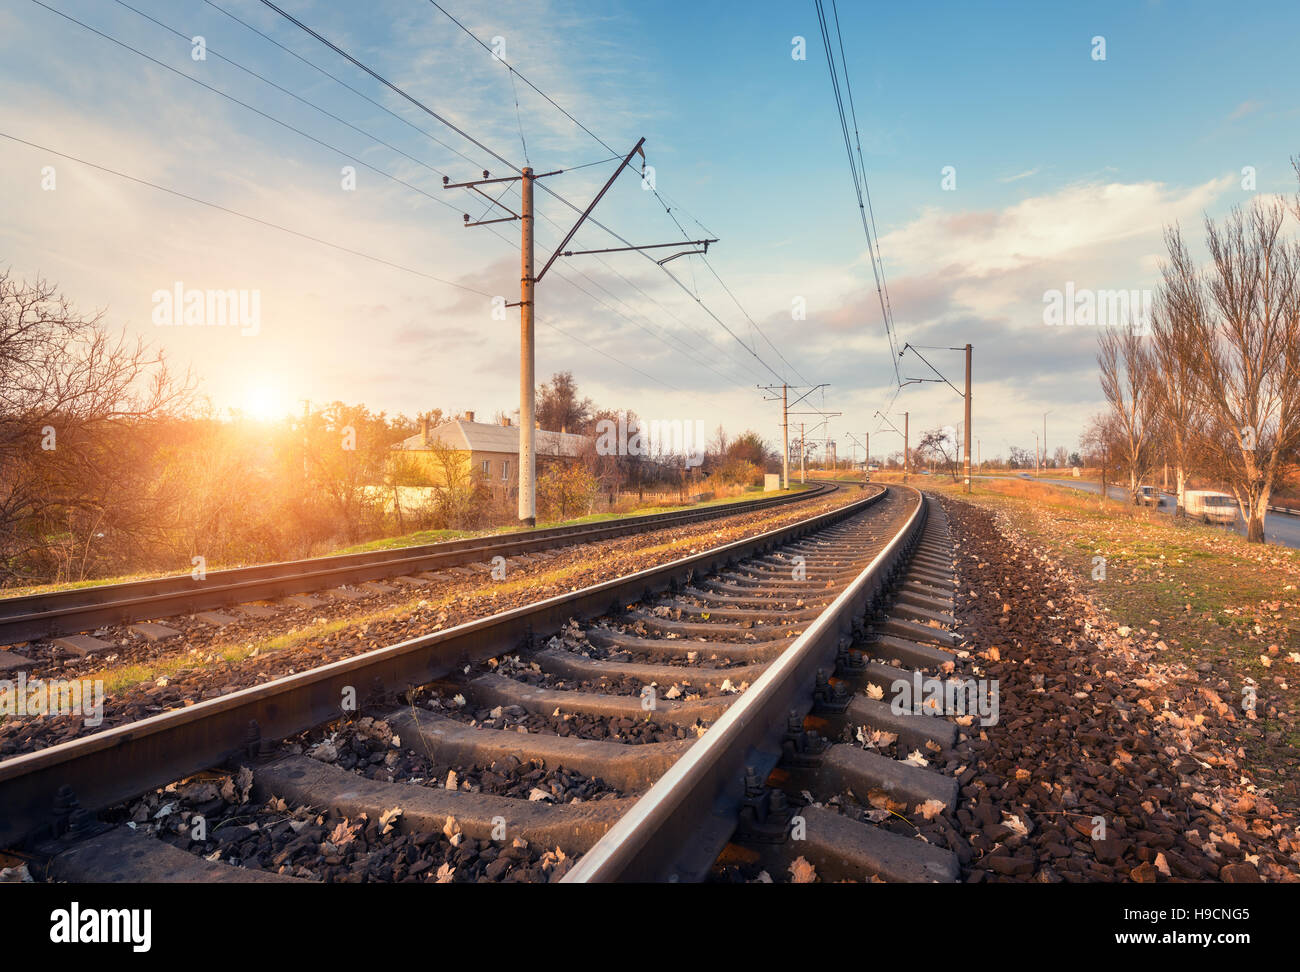 Railway station against beautiful sky at sunset. Industrial landscape with railroad, blue sky with clouds, sun, trees and grass. Railway junction Stock Photo